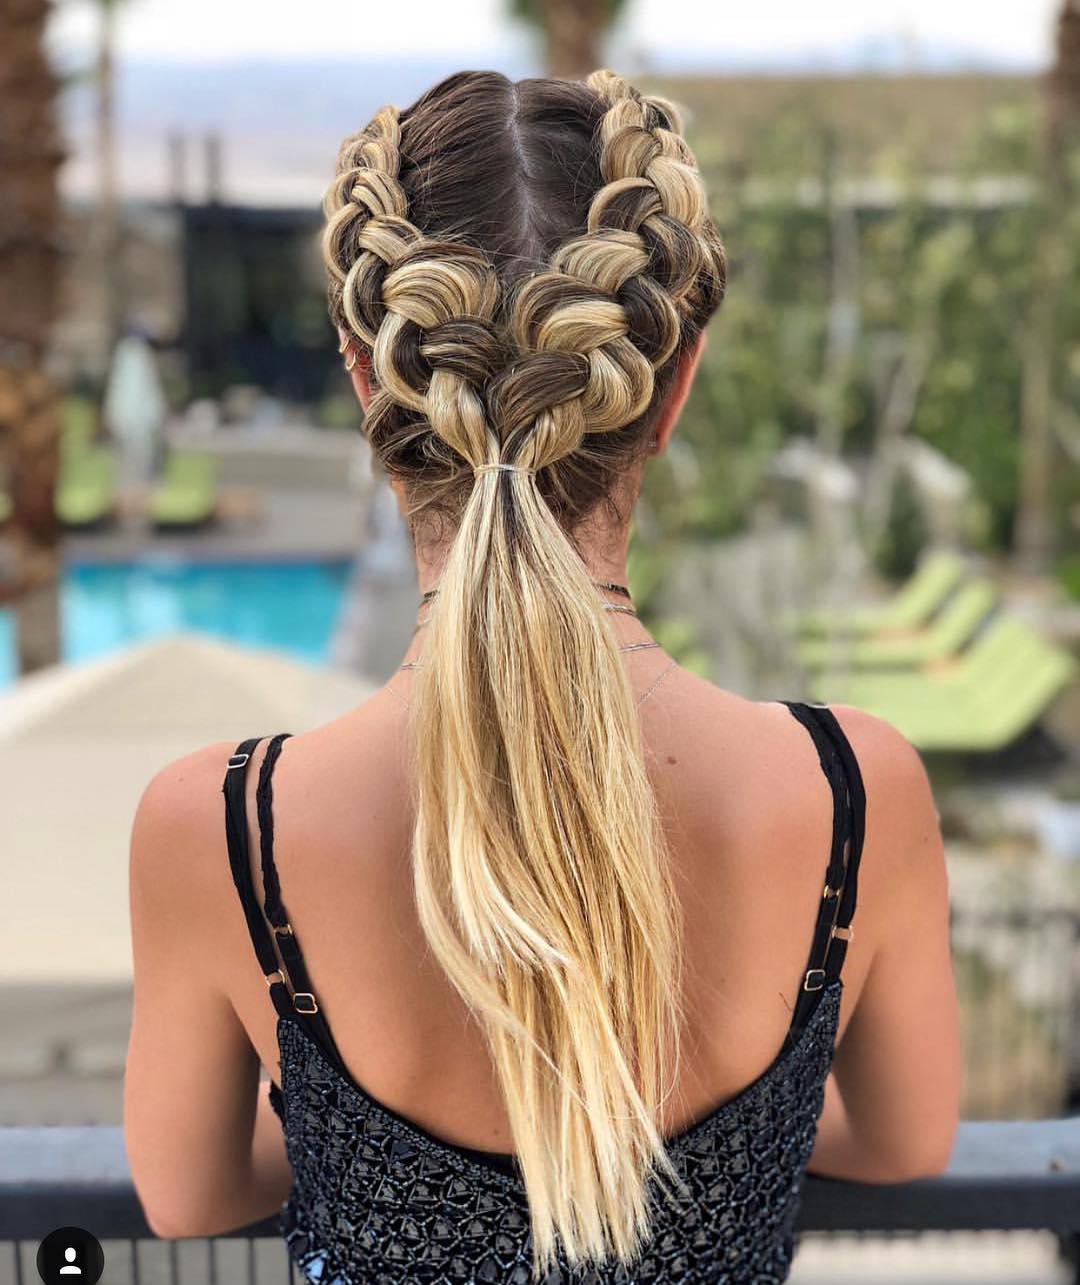 Bohemian Double Dutch Braided Ponytail with Blonde Balayage Hair Color -  The Latest Hairstyles for Men and Women (2020) - Hairstyleology